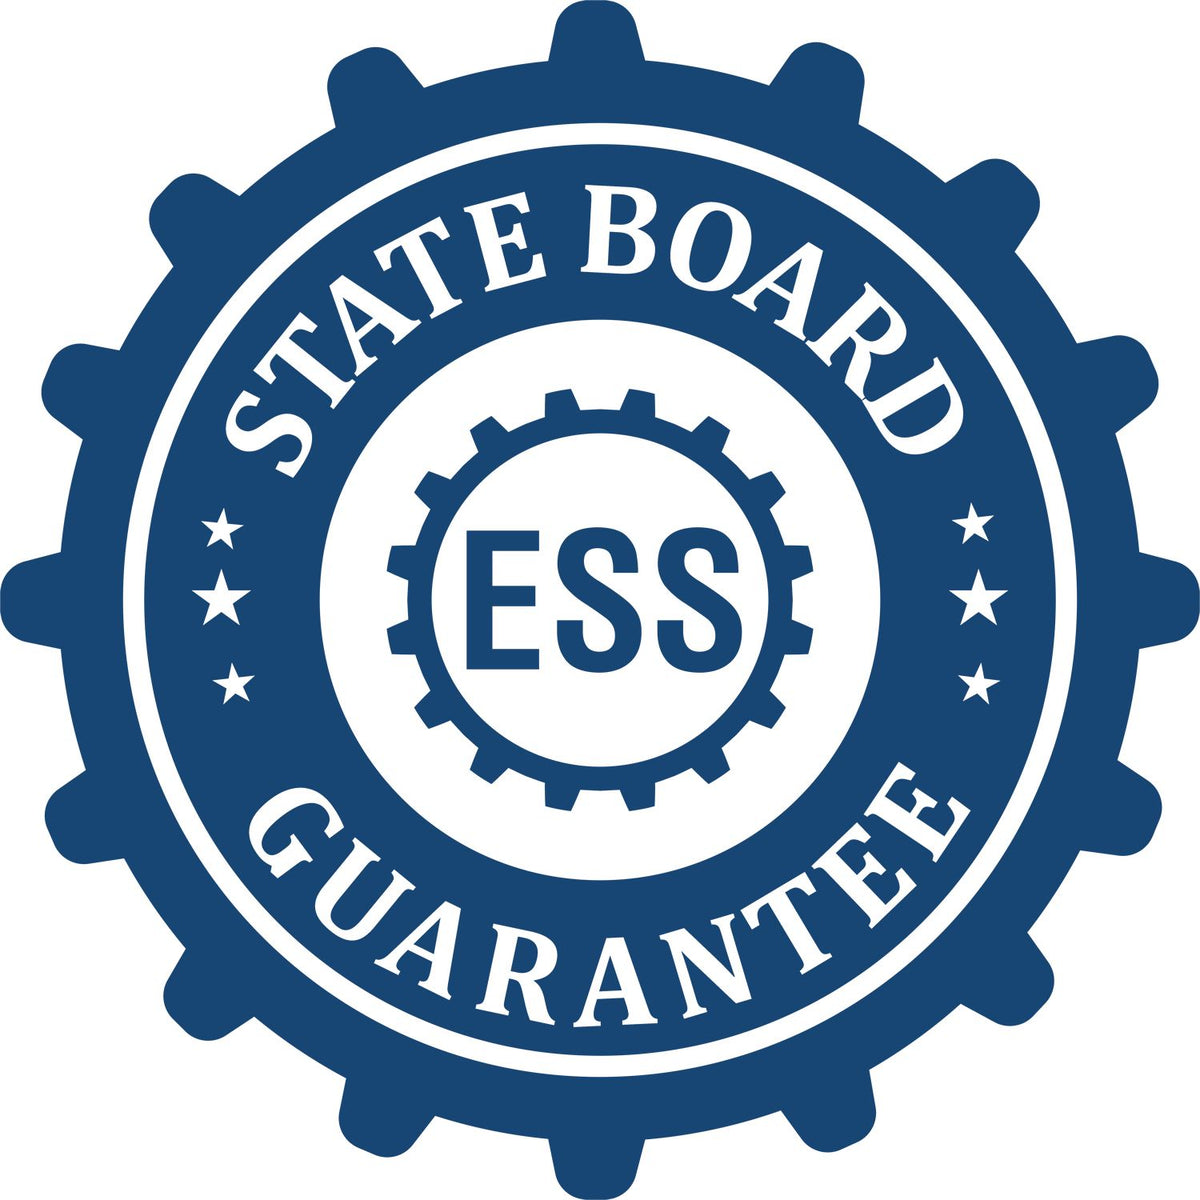 An emblem in a gear shape illustrating a state board guarantee for the State of Nebraska Extended Long Reach Geologist Seal